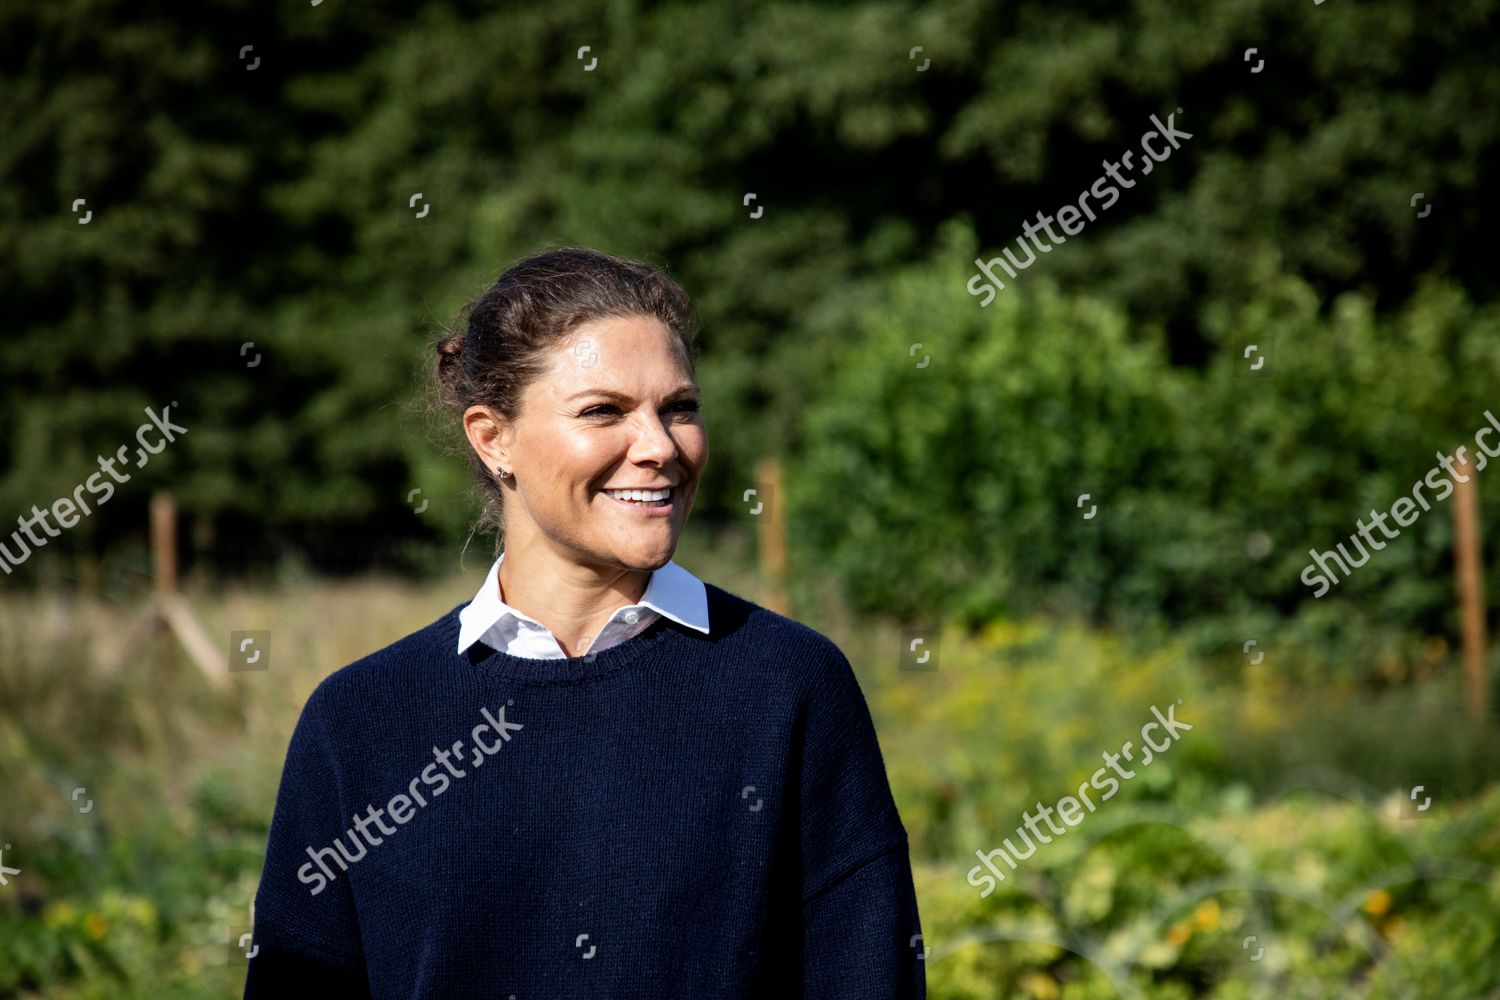 crown-princess-victoria-and-her-dog-rio-visit-alo-and-uto-sweden-shutterstock-editorial-12361980au.jpg